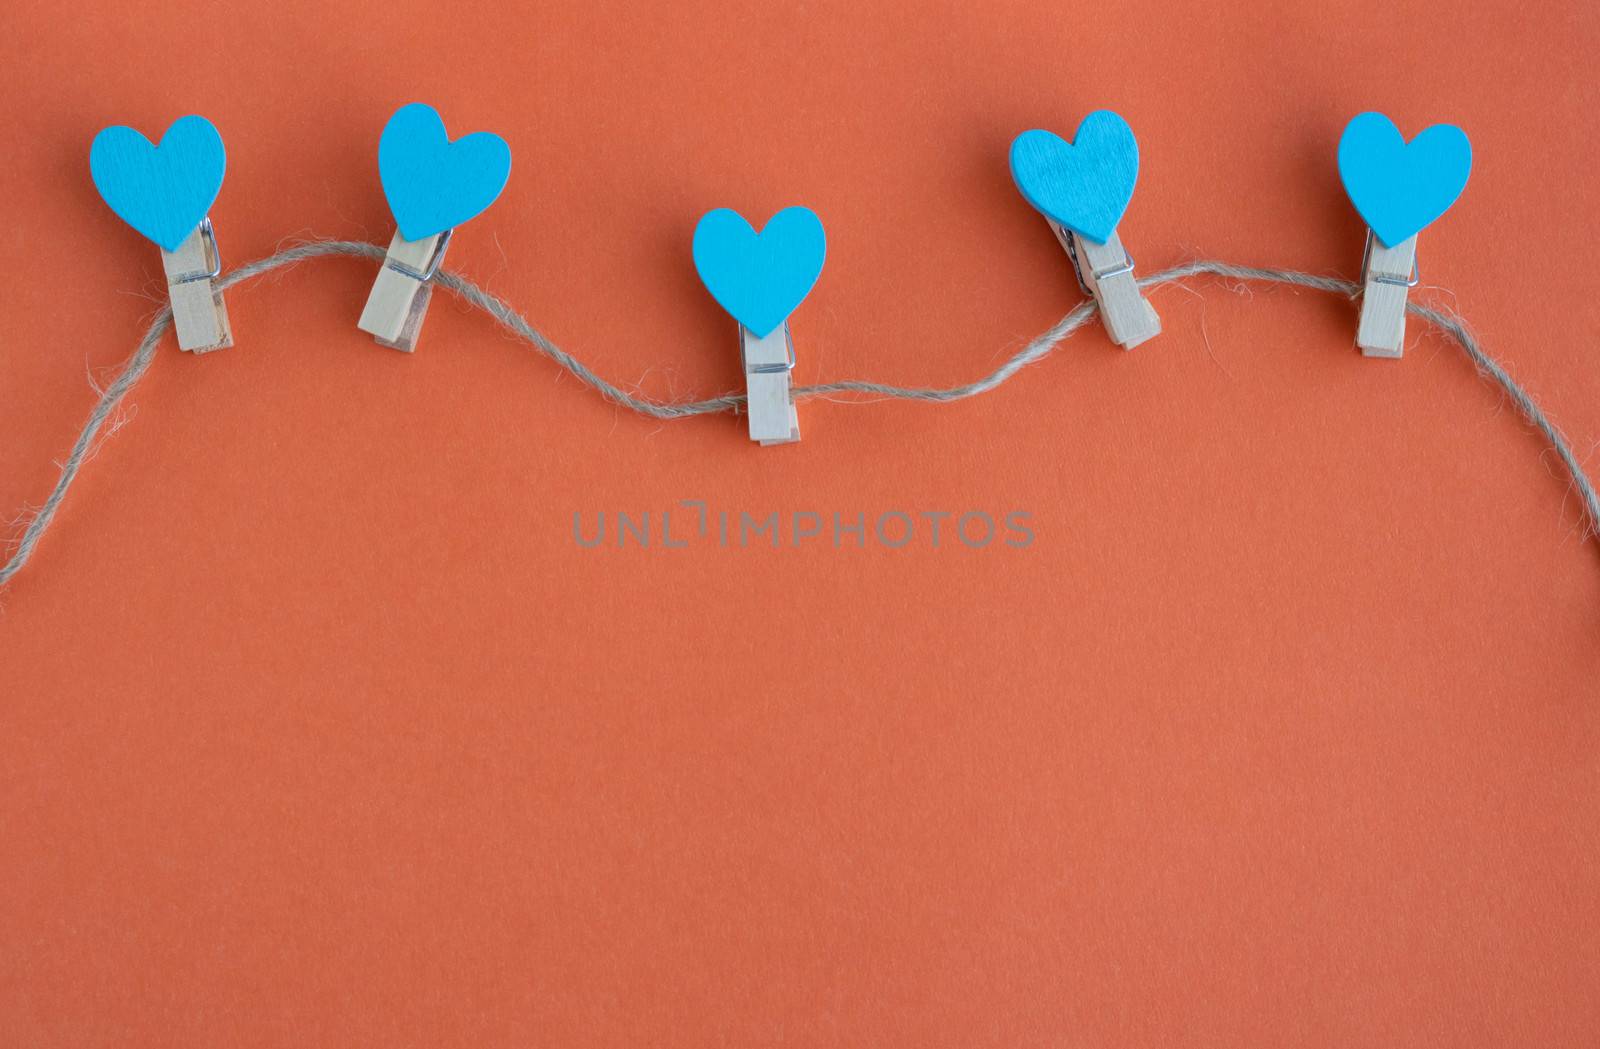 Small clothespins and blue hearts on a rope on an orange background.